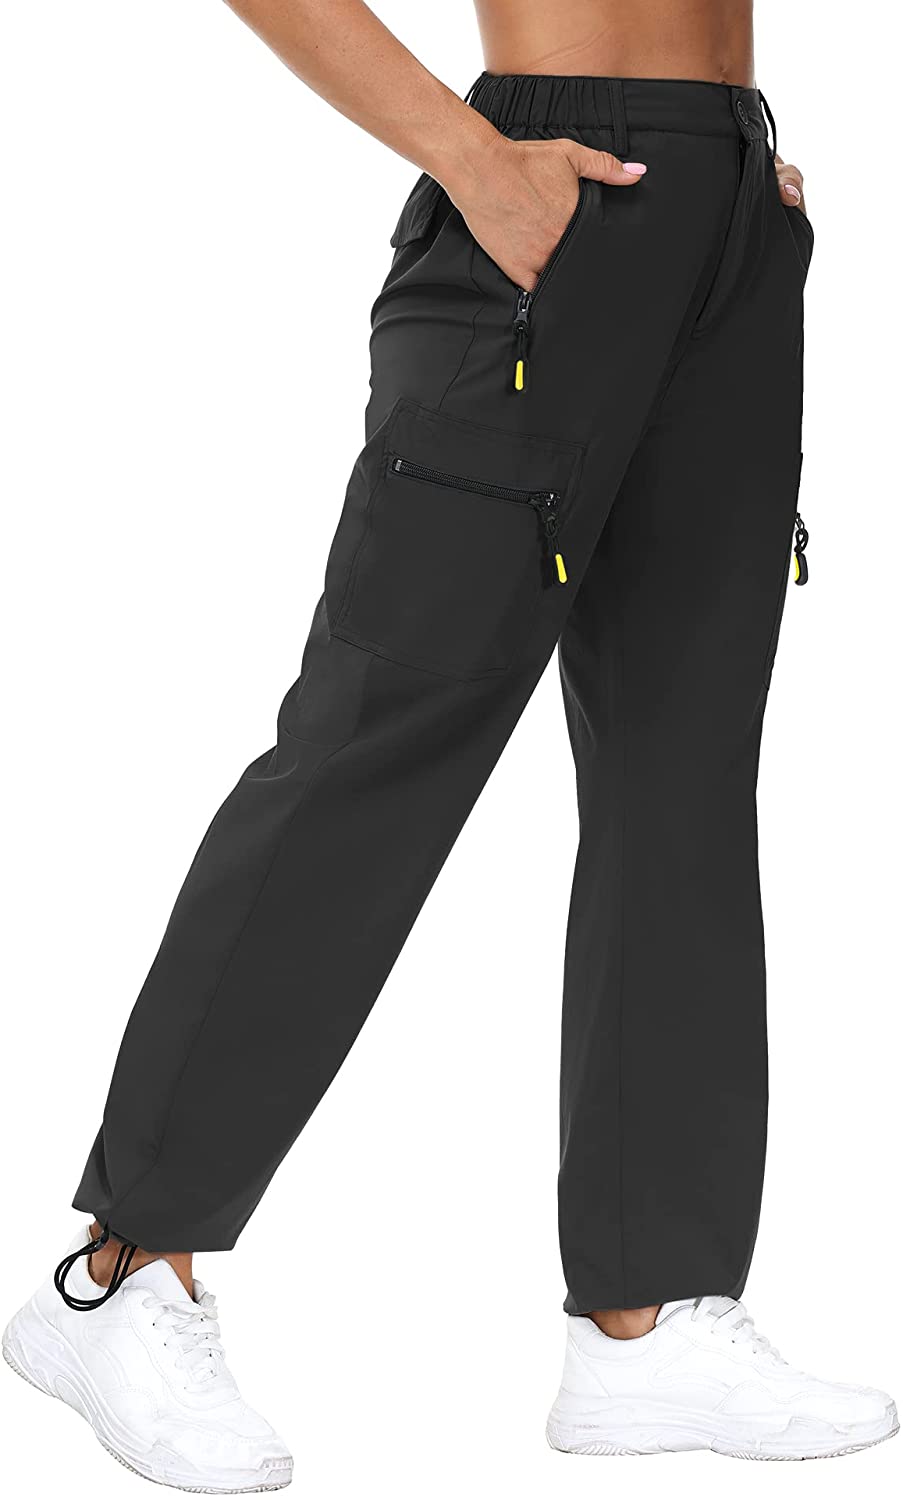 VVK Women's Hiking Cargo Pants Lightweight Quick Dry Outdoor Athletic Pants  Camp